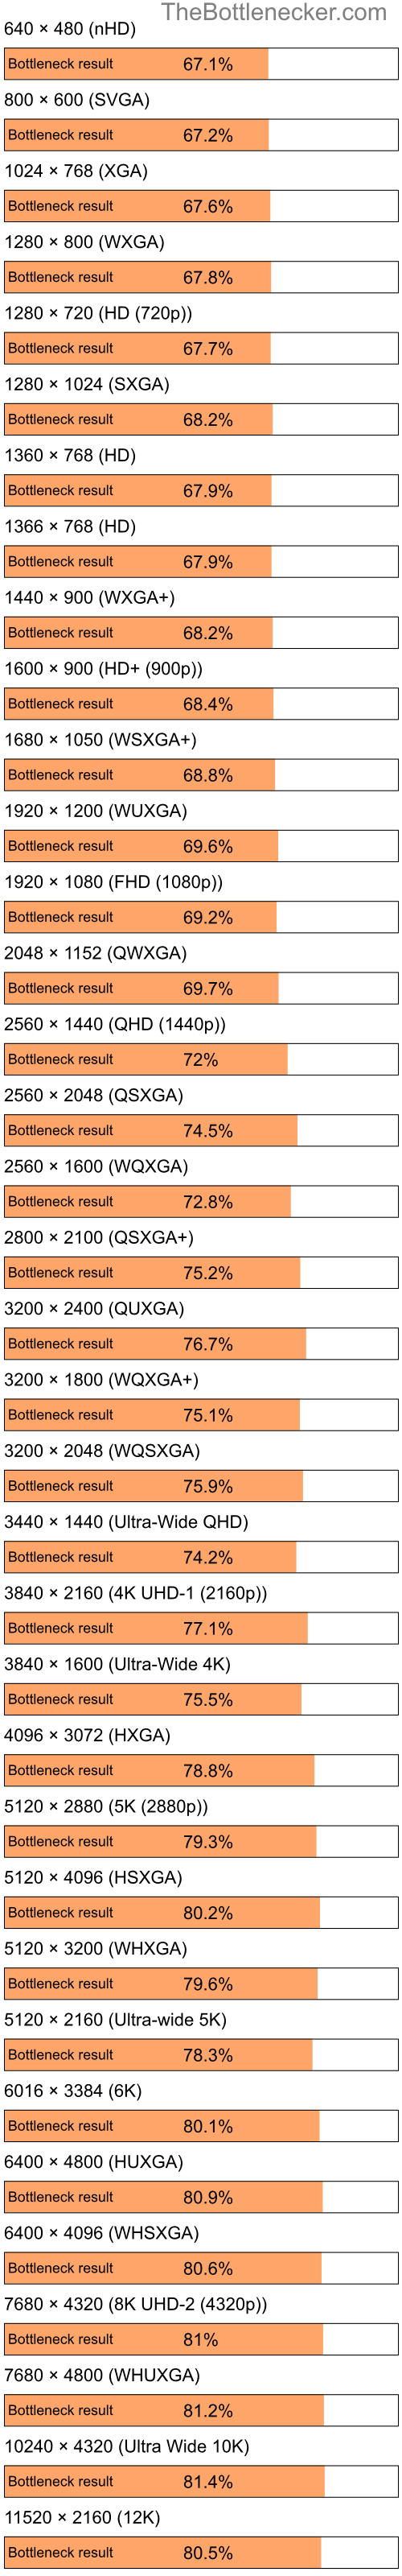 Bottleneck results by resolution for Intel Celeron and NVIDIA GeForce G210 in Graphic Card Intense Tasks